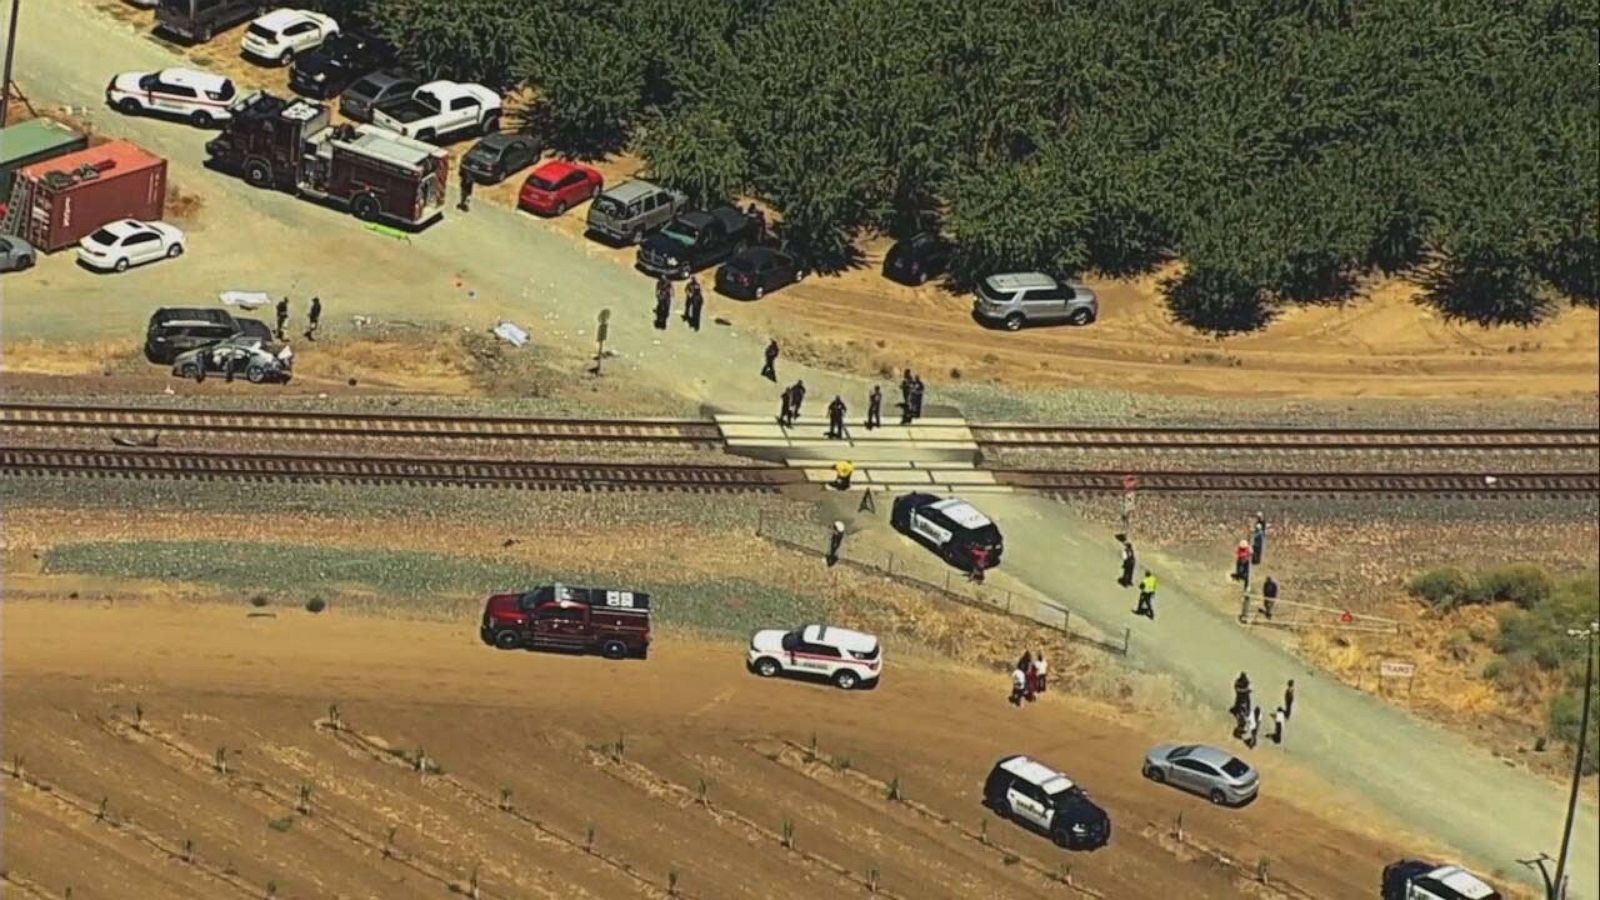 3 dead, 2 injured after Amtrak train collides with car in California:  Officials - ABC News